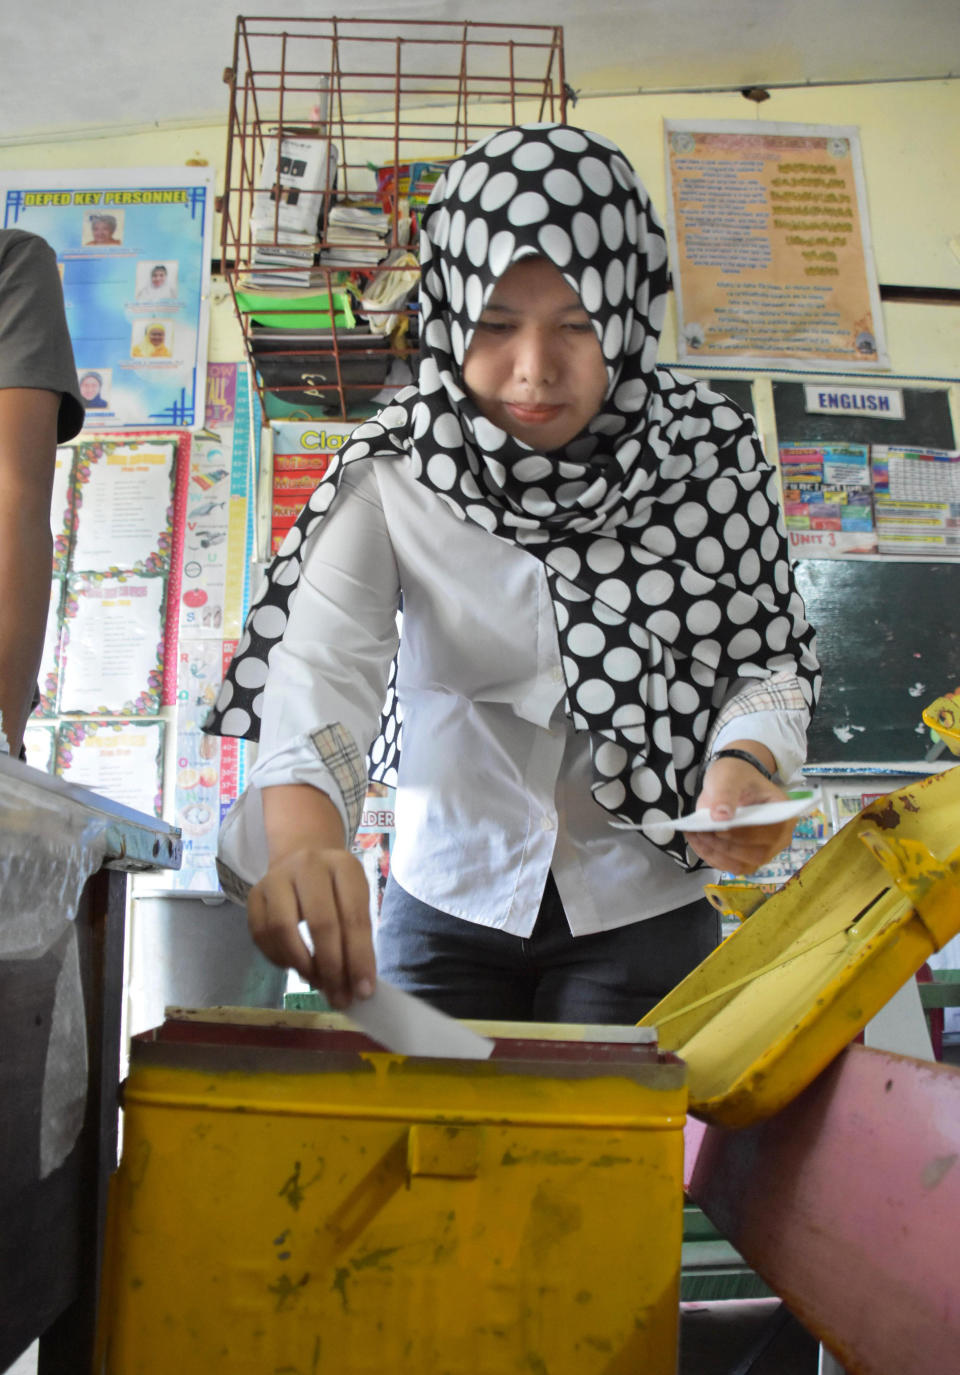 A Muslim woman casts her vote in a referendum in Maguindanao province, southern Philippines, Monday, Jan. 21, 2019. Muslims in the southern Philippines voted Monday in a referendum on a new autonomous region that seeks to end nearly half a century of unrest, in what their leaders are touting as the best alternative to a new wave of Islamic State group-inspired militants. (Kyodo News via AP)